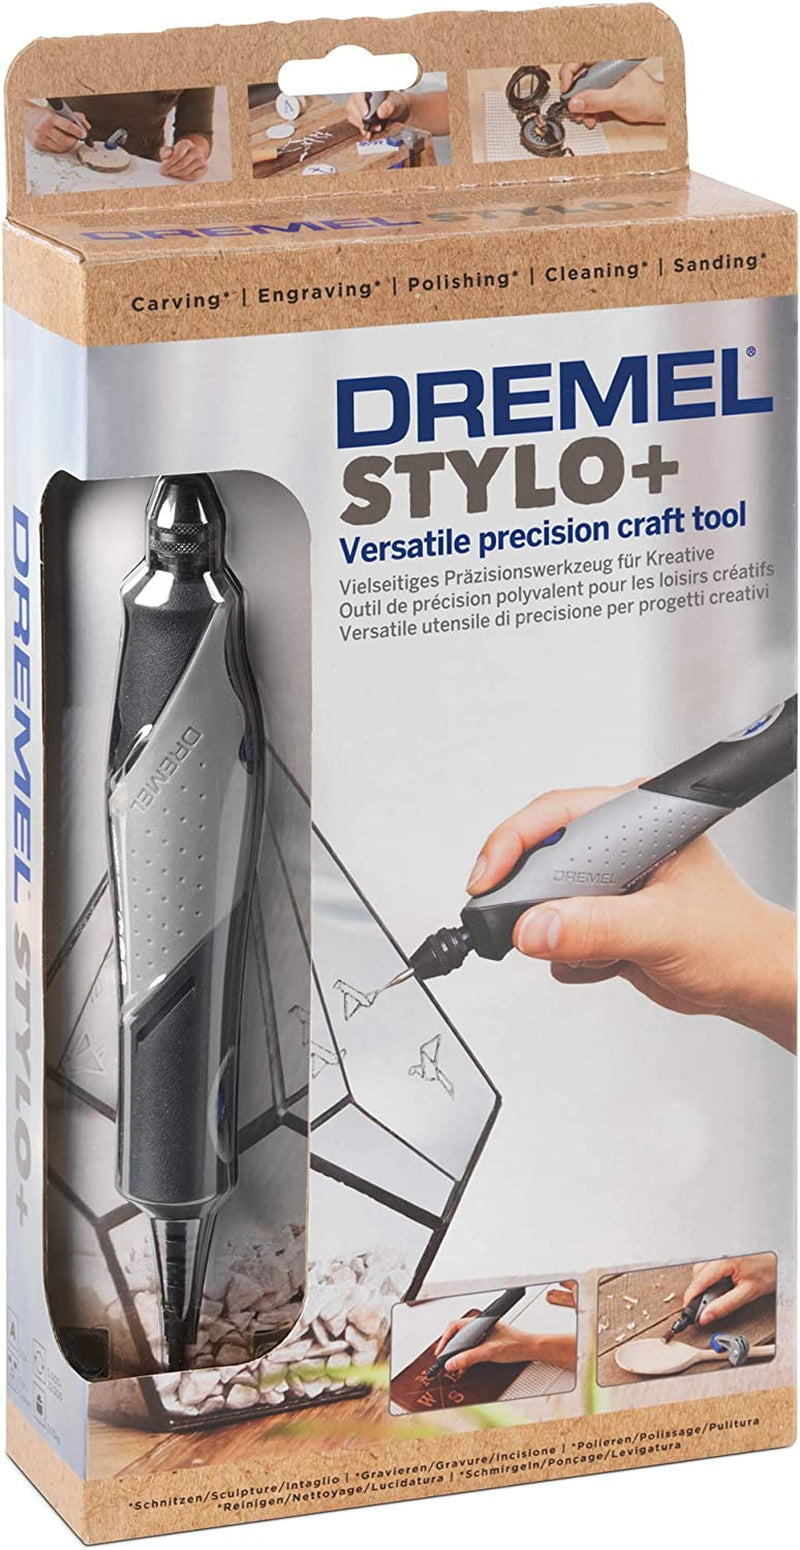 Dremel Stylo + and Carving Kit Combo